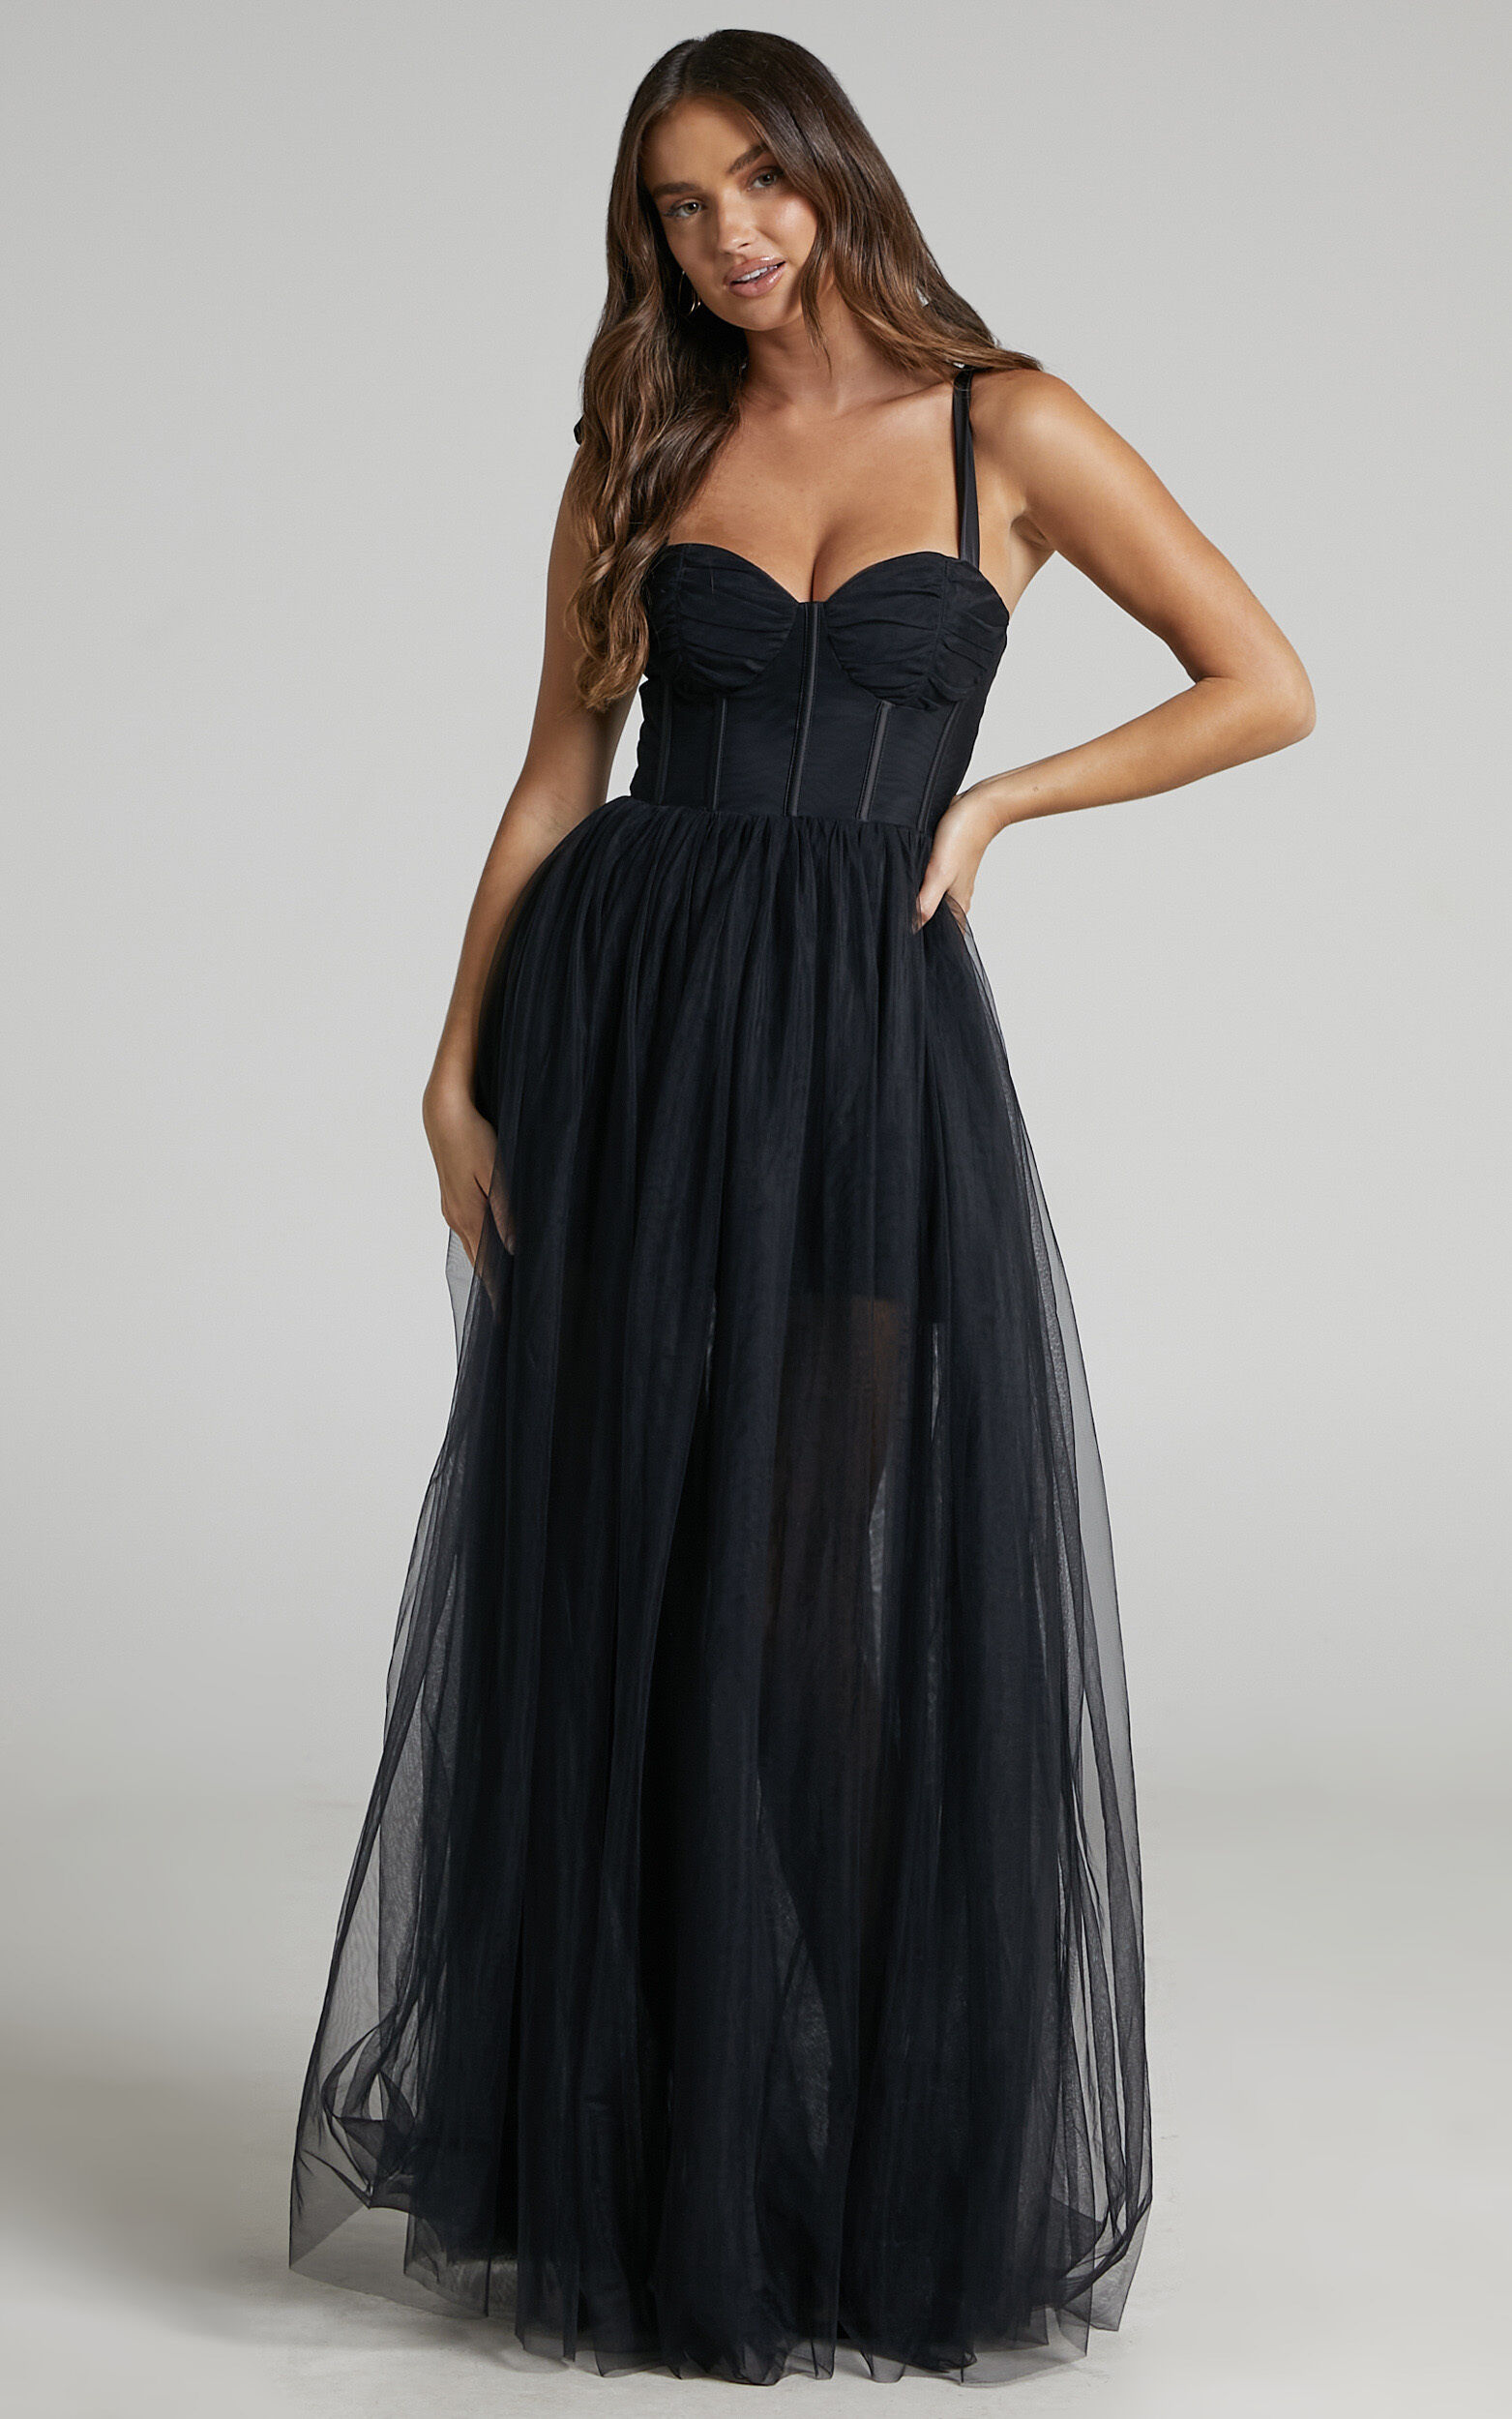 Emmary Gown - Bustier Bodice Tulle Gown in Black - 06, BLK1